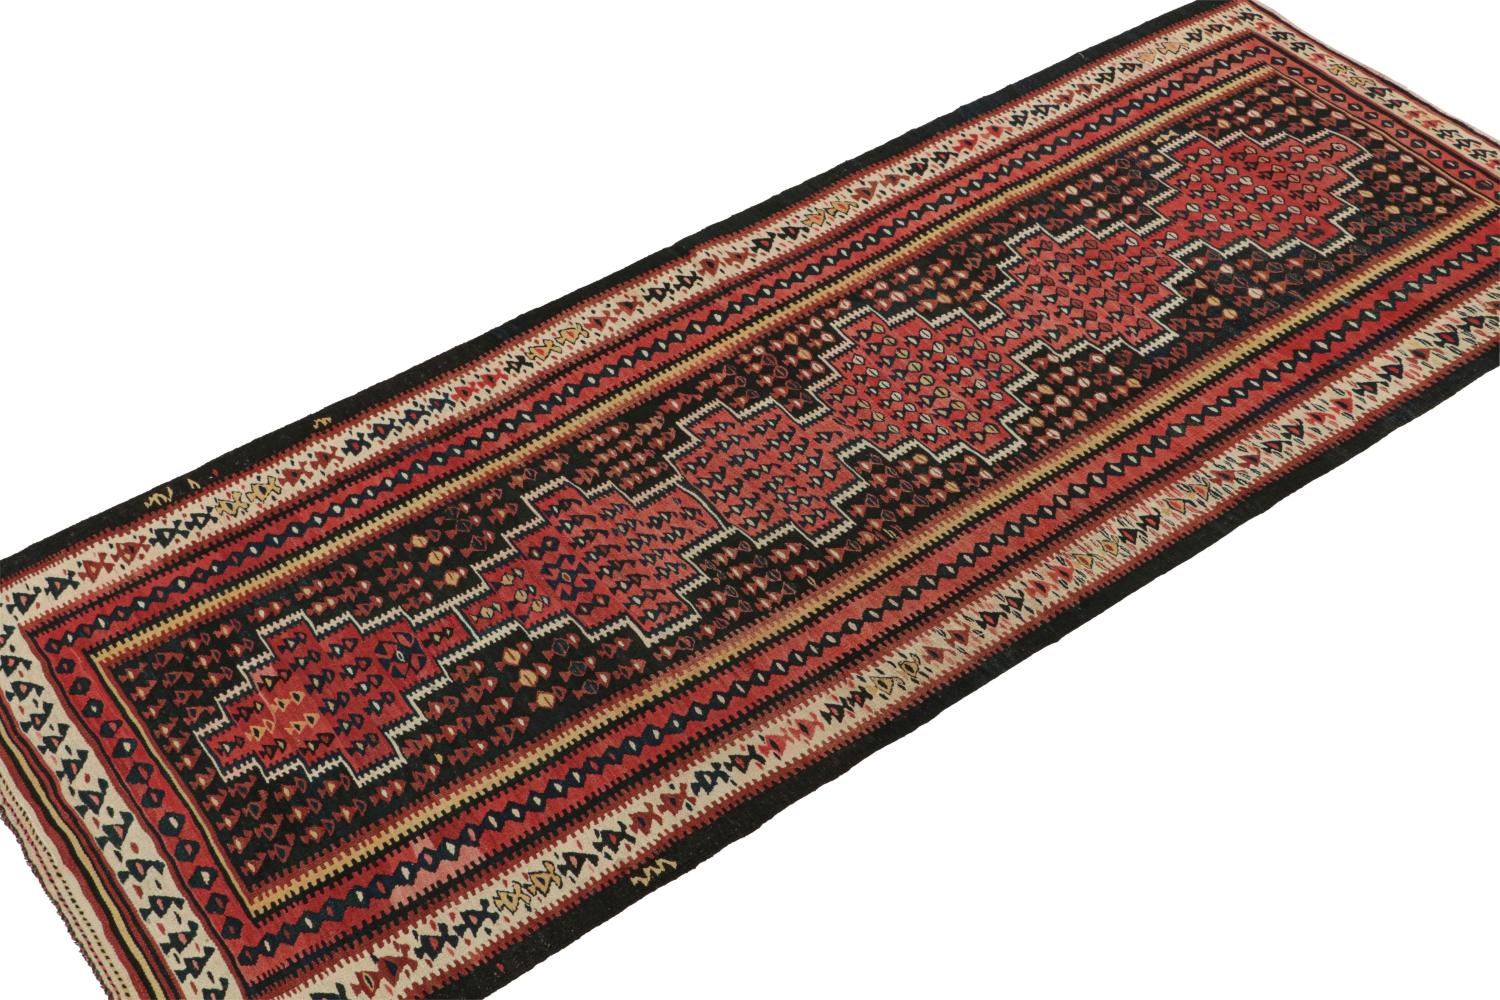 Vintage Persian Kilim in Black and Red with Geometric Patterns In Good Condition For Sale In Long Island City, NY